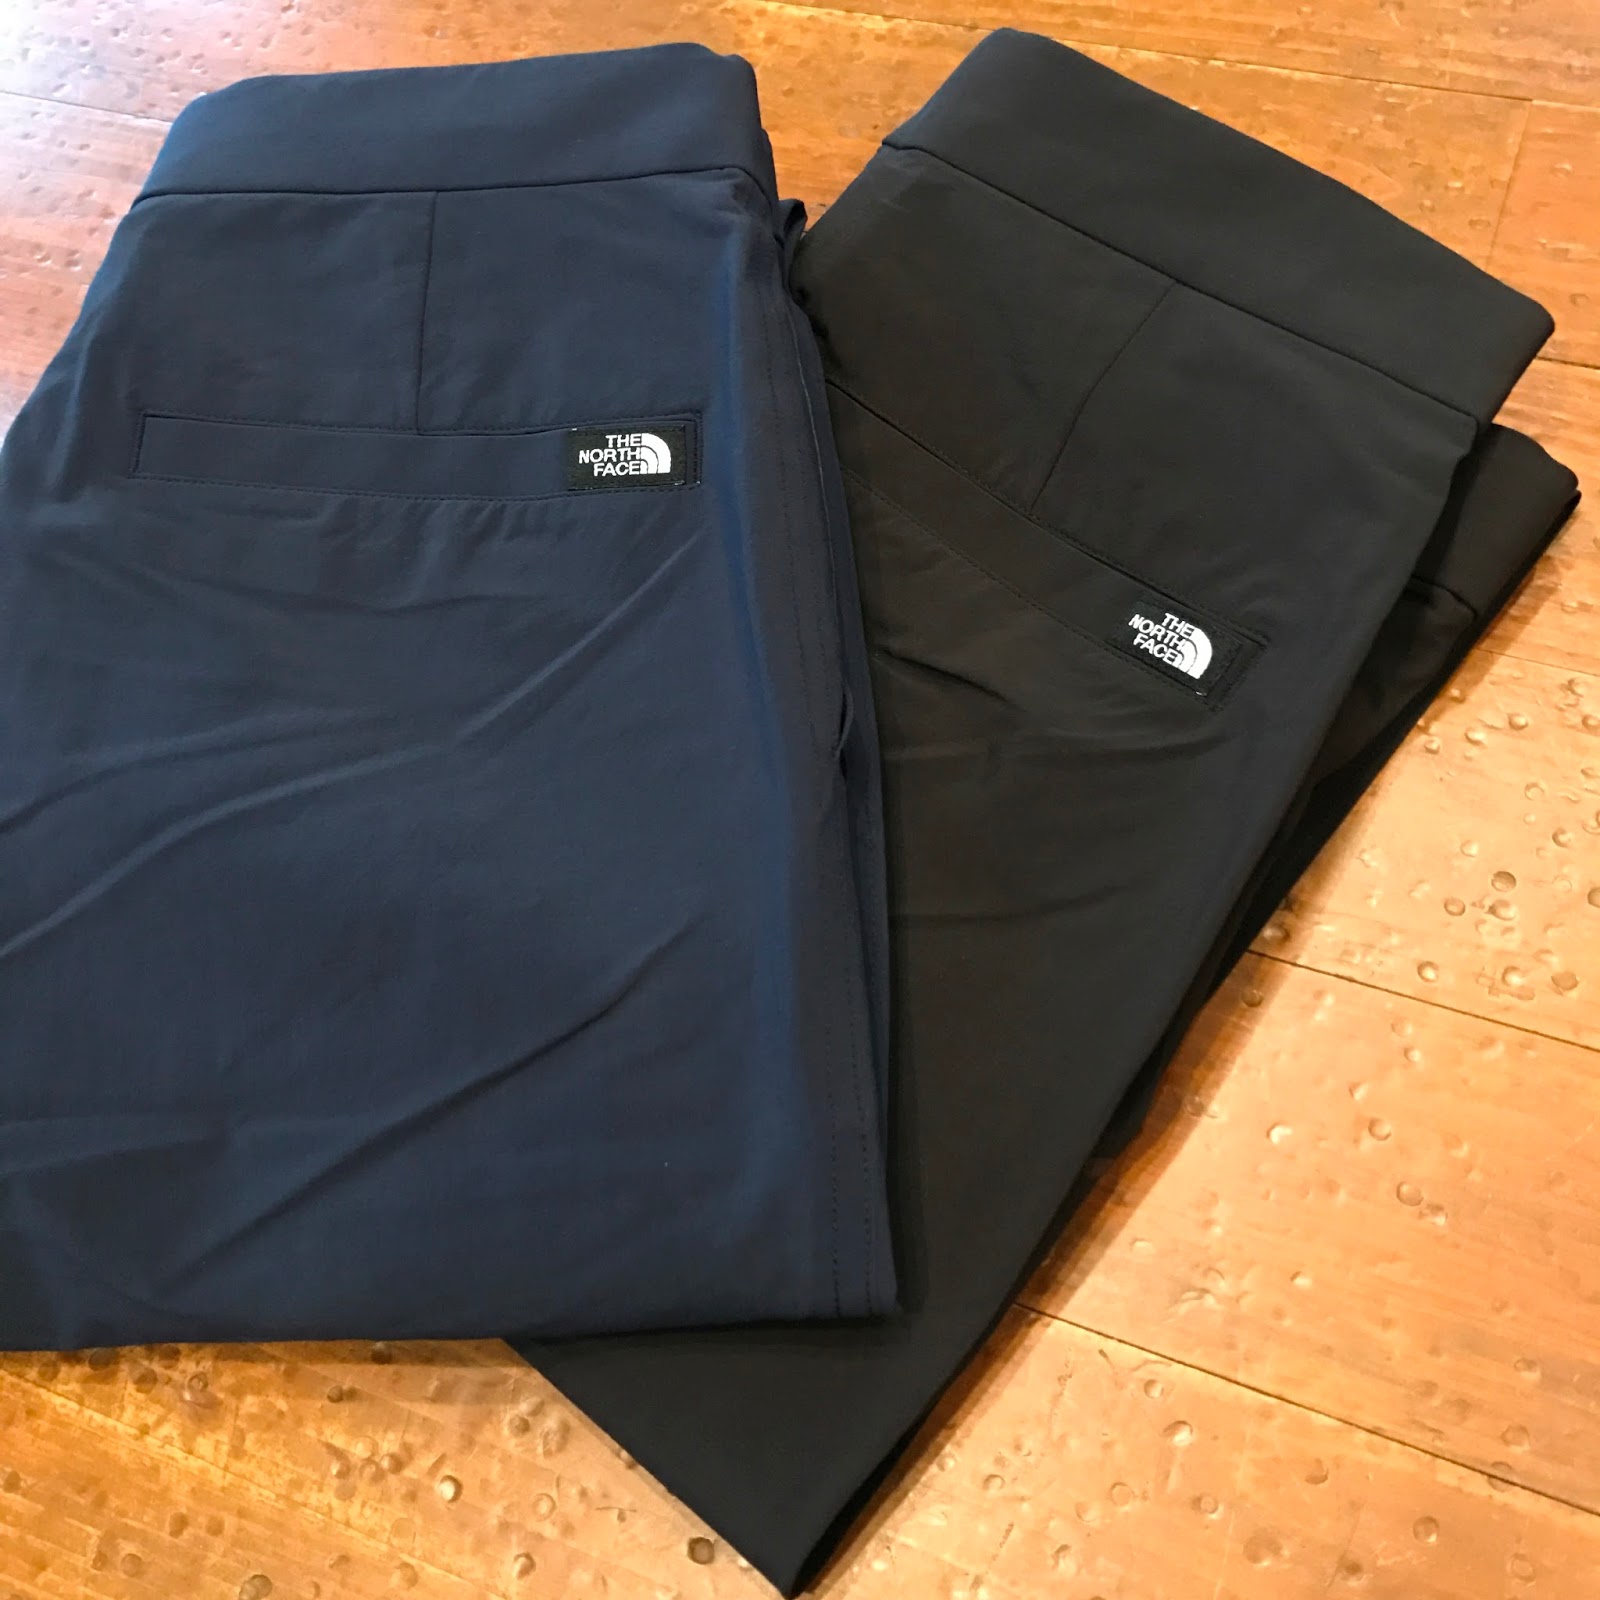 LIFE STORE / FREEDOM: THE NORTH FACE “Verb 9/10 Tech Pant”